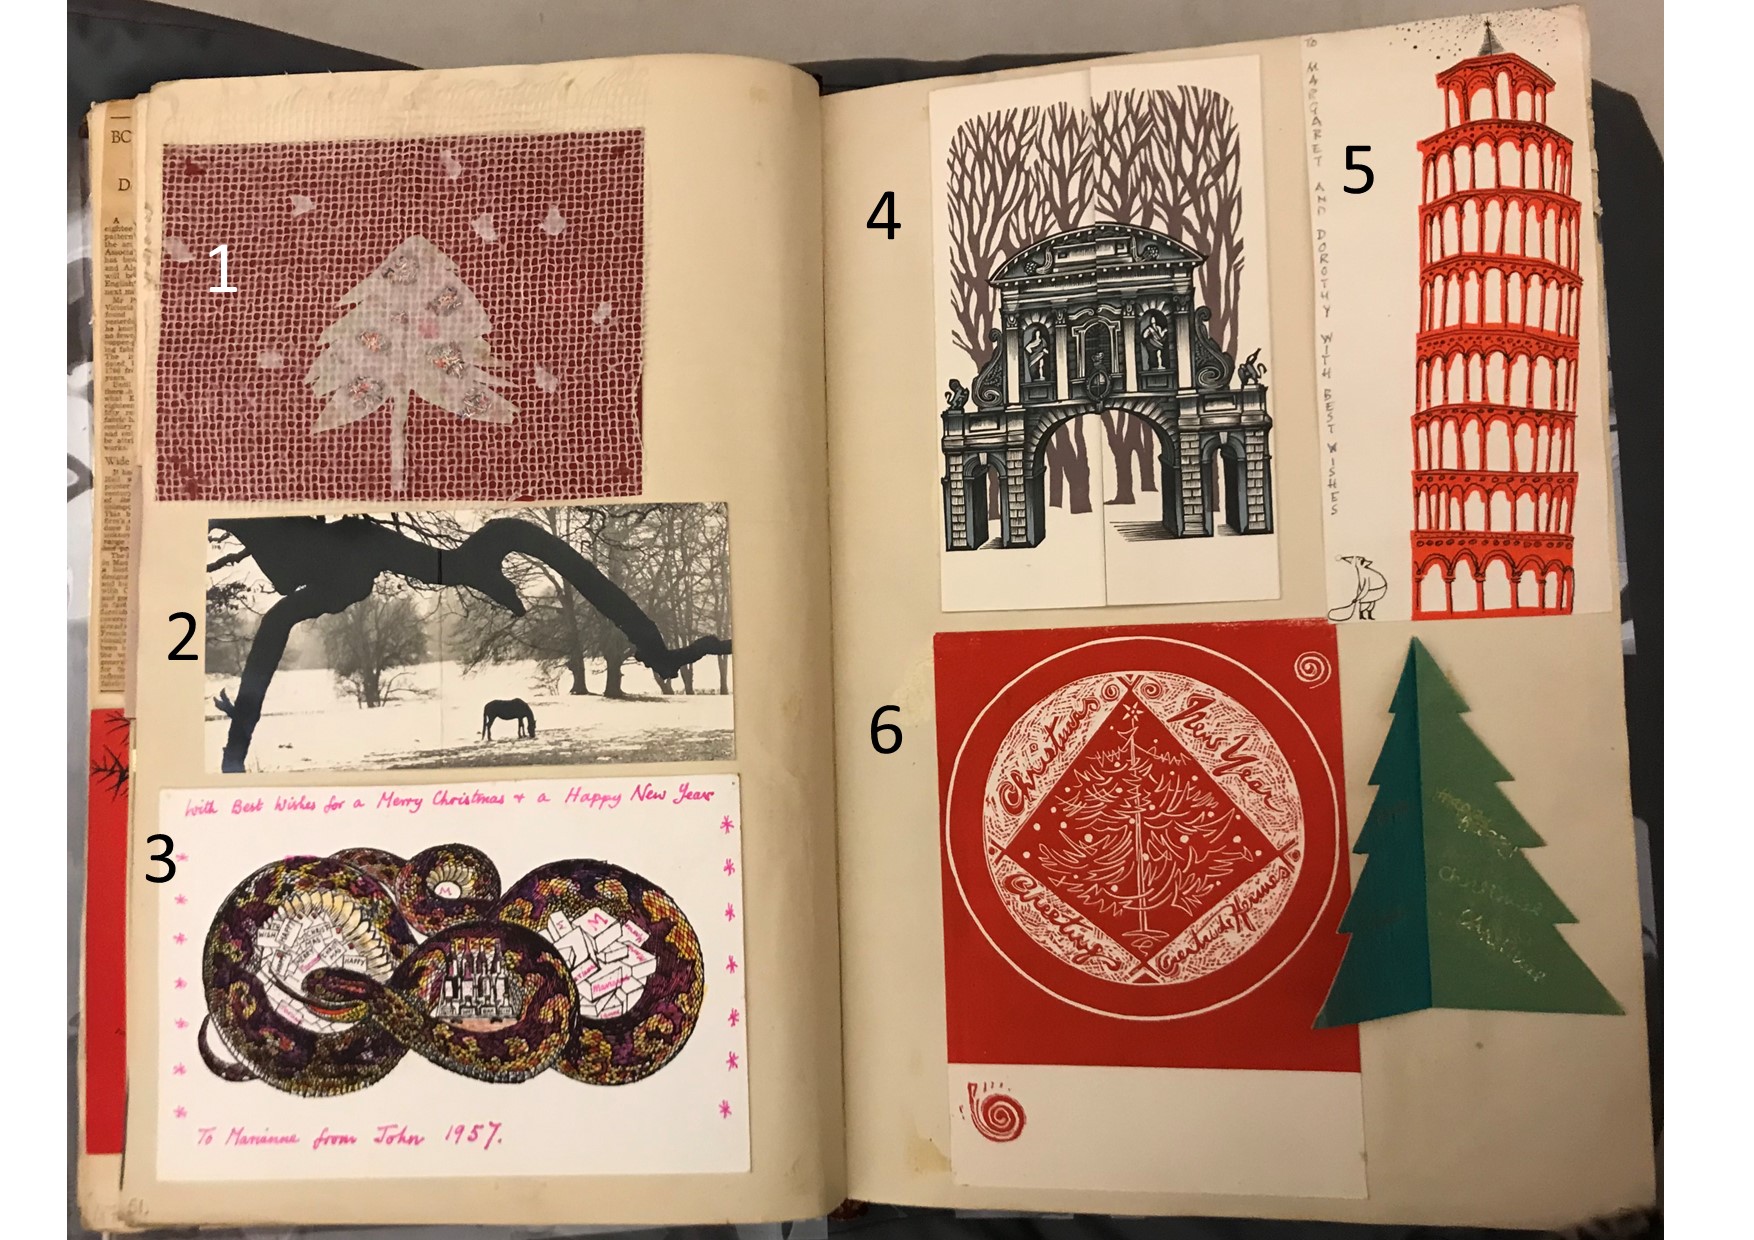 Work of the Week 62: More from Marianne Straub’s scrapbook